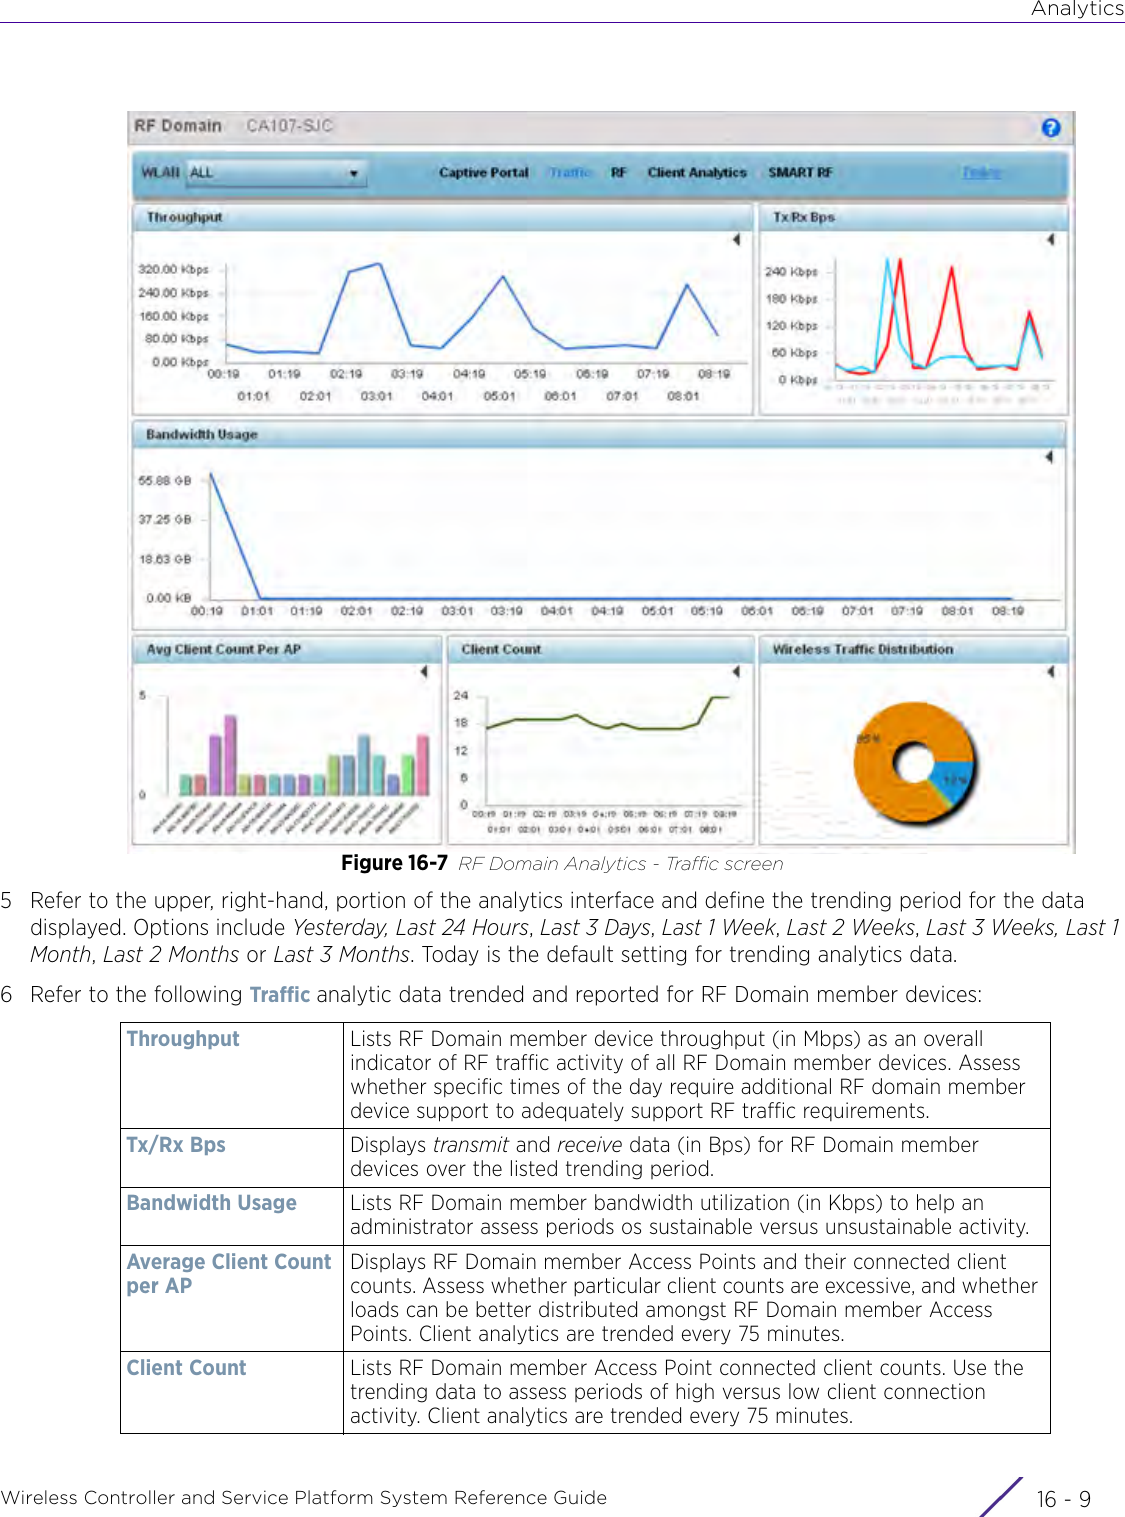 AnalyticsWireless Controller and Service Platform System Reference Guide 16 - 9Figure 16-7 RF Domain Analytics - Traffic screen5 Refer to the upper, right-hand, portion of the analytics interface and define the trending period for the data displayed. Options include Yesterday, Last 24 Hours, Last 3 Days, Last 1 Week, Last 2 Weeks, Last 3 Weeks, Last 1 Month, Last 2 Months or Last 3 Months. Today is the default setting for trending analytics data.6 Refer to the following Traffic analytic data trended and reported for RF Domain member devices:Throughput Lists RF Domain member device throughput (in Mbps) as an overall indicator of RF traffic activity of all RF Domain member devices. Assess whether specific times of the day require additional RF domain member device support to adequately support RF traffic requirements.Tx/Rx Bps Displays transmit and receive data (in Bps) for RF Domain member devices over the listed trending period.Bandwidth Usage Lists RF Domain member bandwidth utilization (in Kbps) to help an administrator assess periods os sustainable versus unsustainable activity.Average Client Count per APDisplays RF Domain member Access Points and their connected client counts. Assess whether particular client counts are excessive, and whether loads can be better distributed amongst RF Domain member Access Points. Client analytics are trended every 75 minutes.Client Count Lists RF Domain member Access Point connected client counts. Use the trending data to assess periods of high versus low client connection activity. Client analytics are trended every 75 minutes.